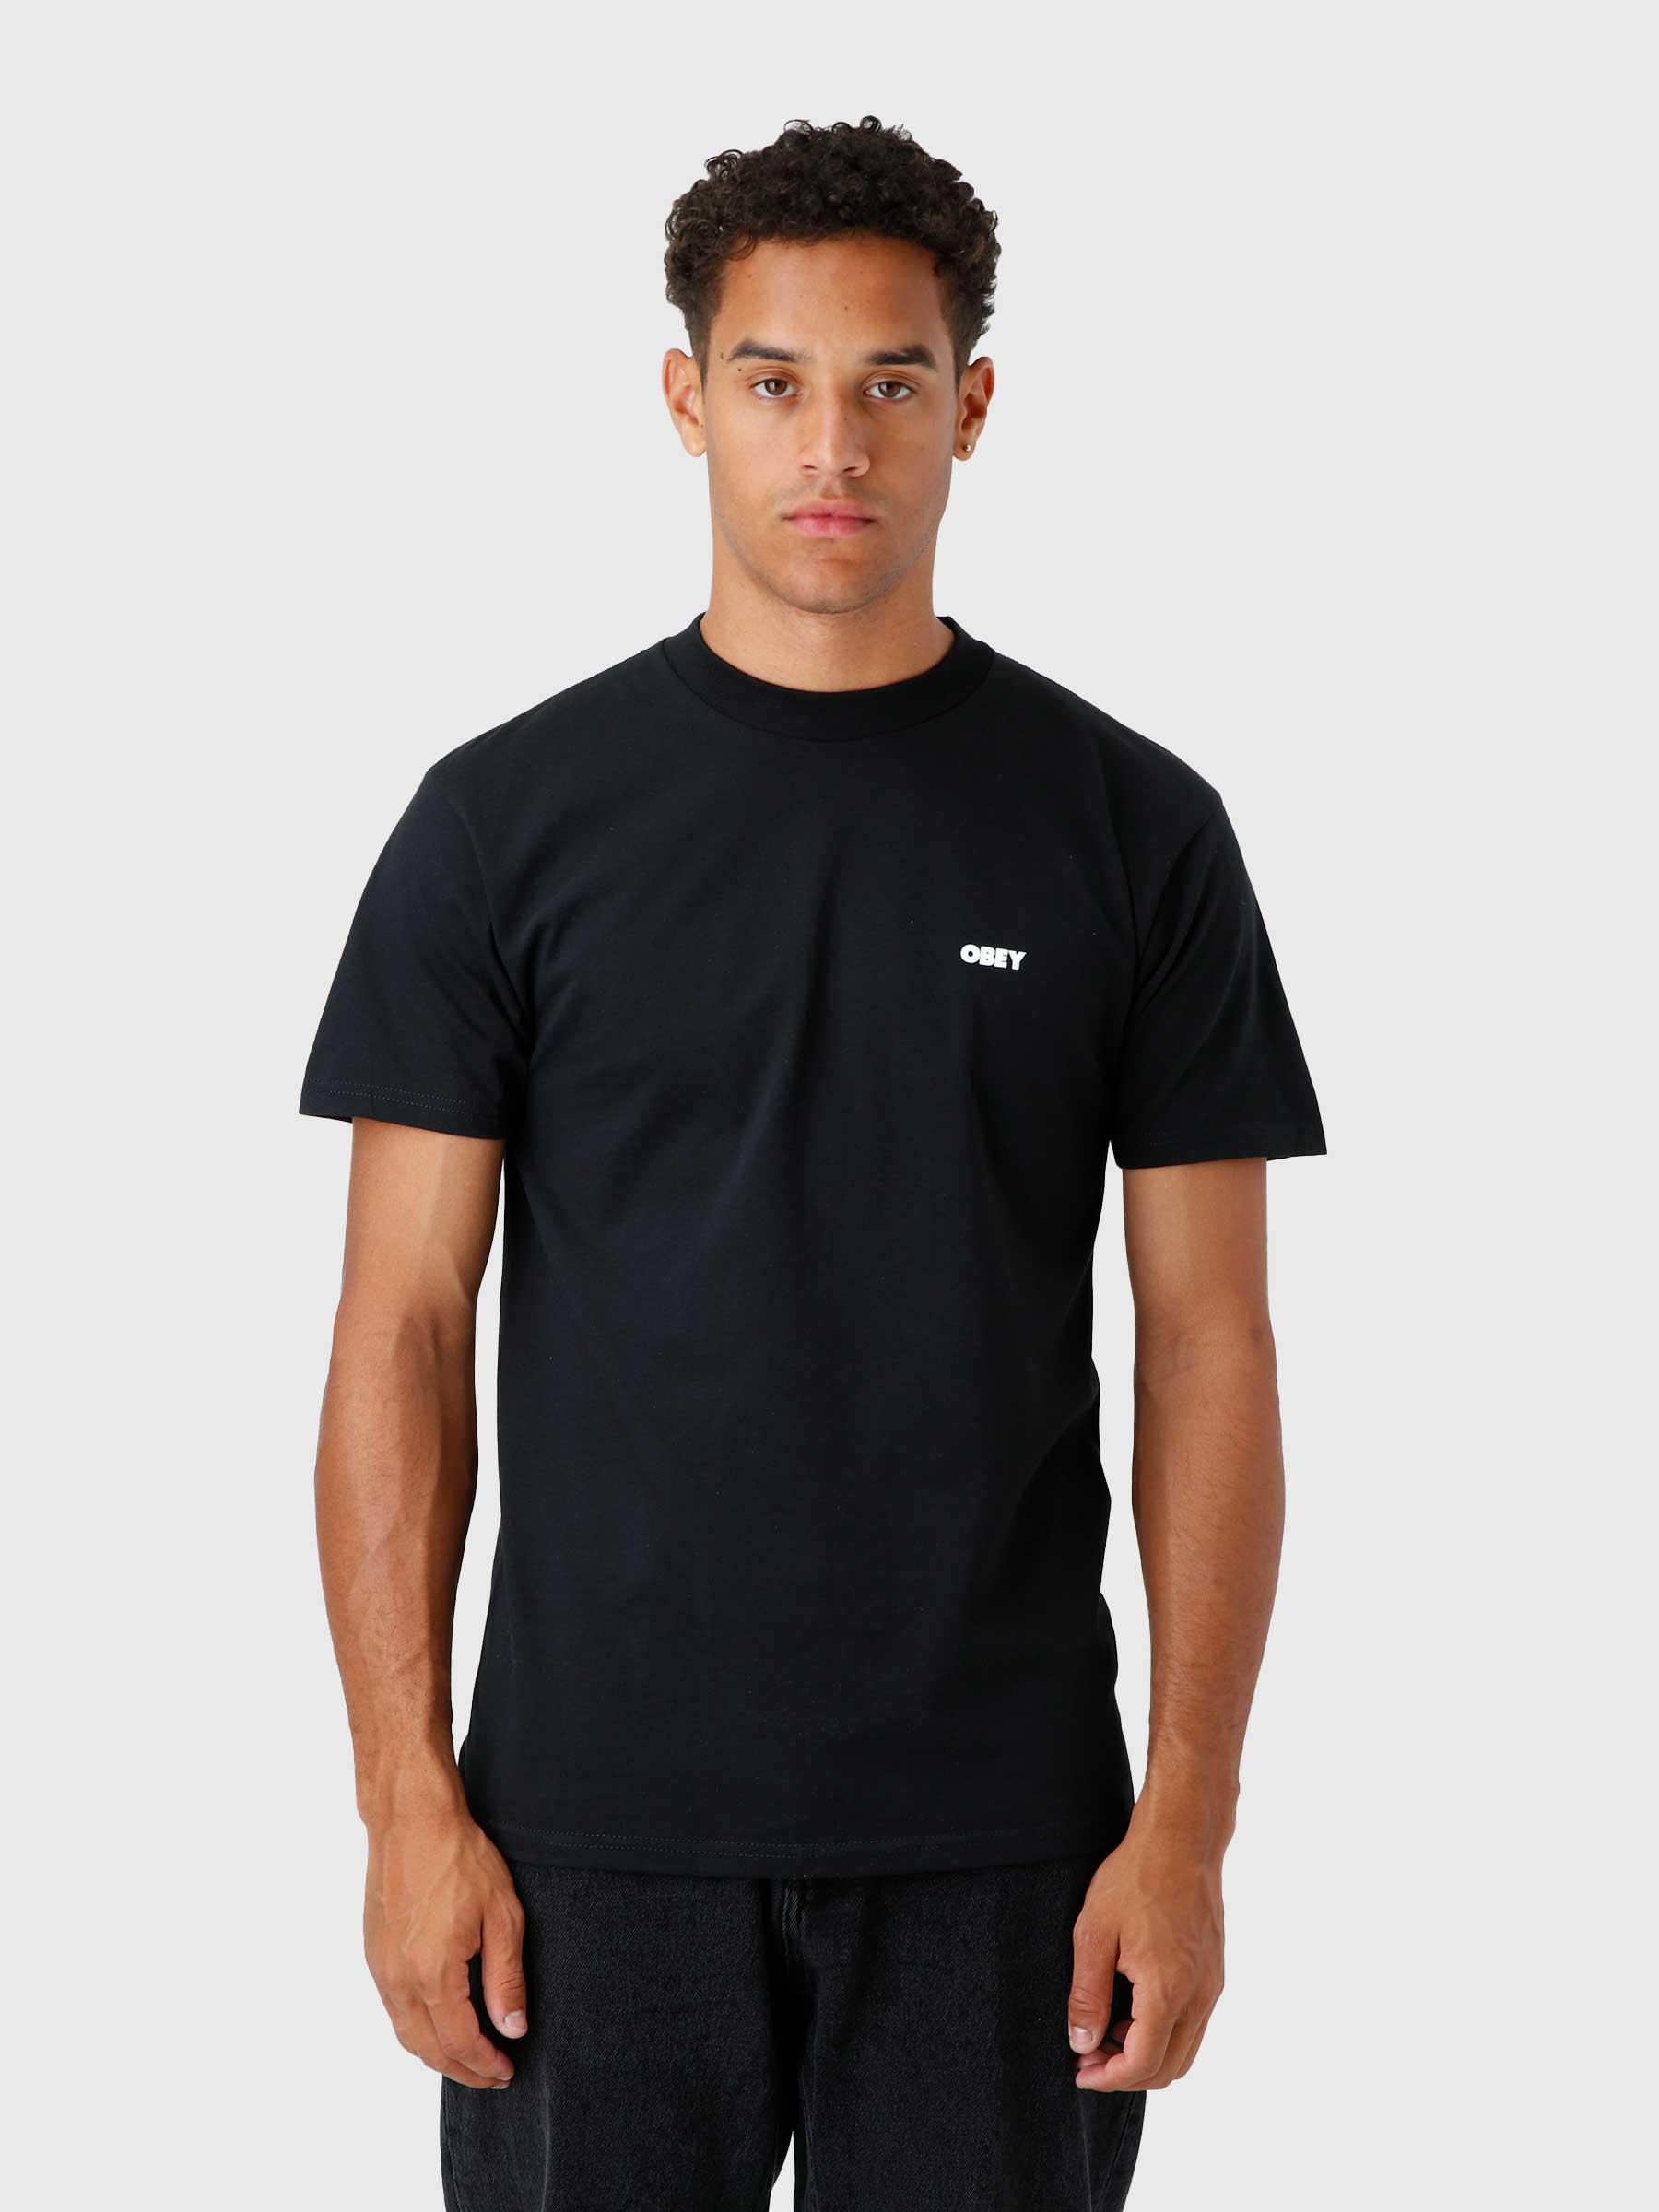 Obey Opposition & Resistance T-shirt Black 165263234